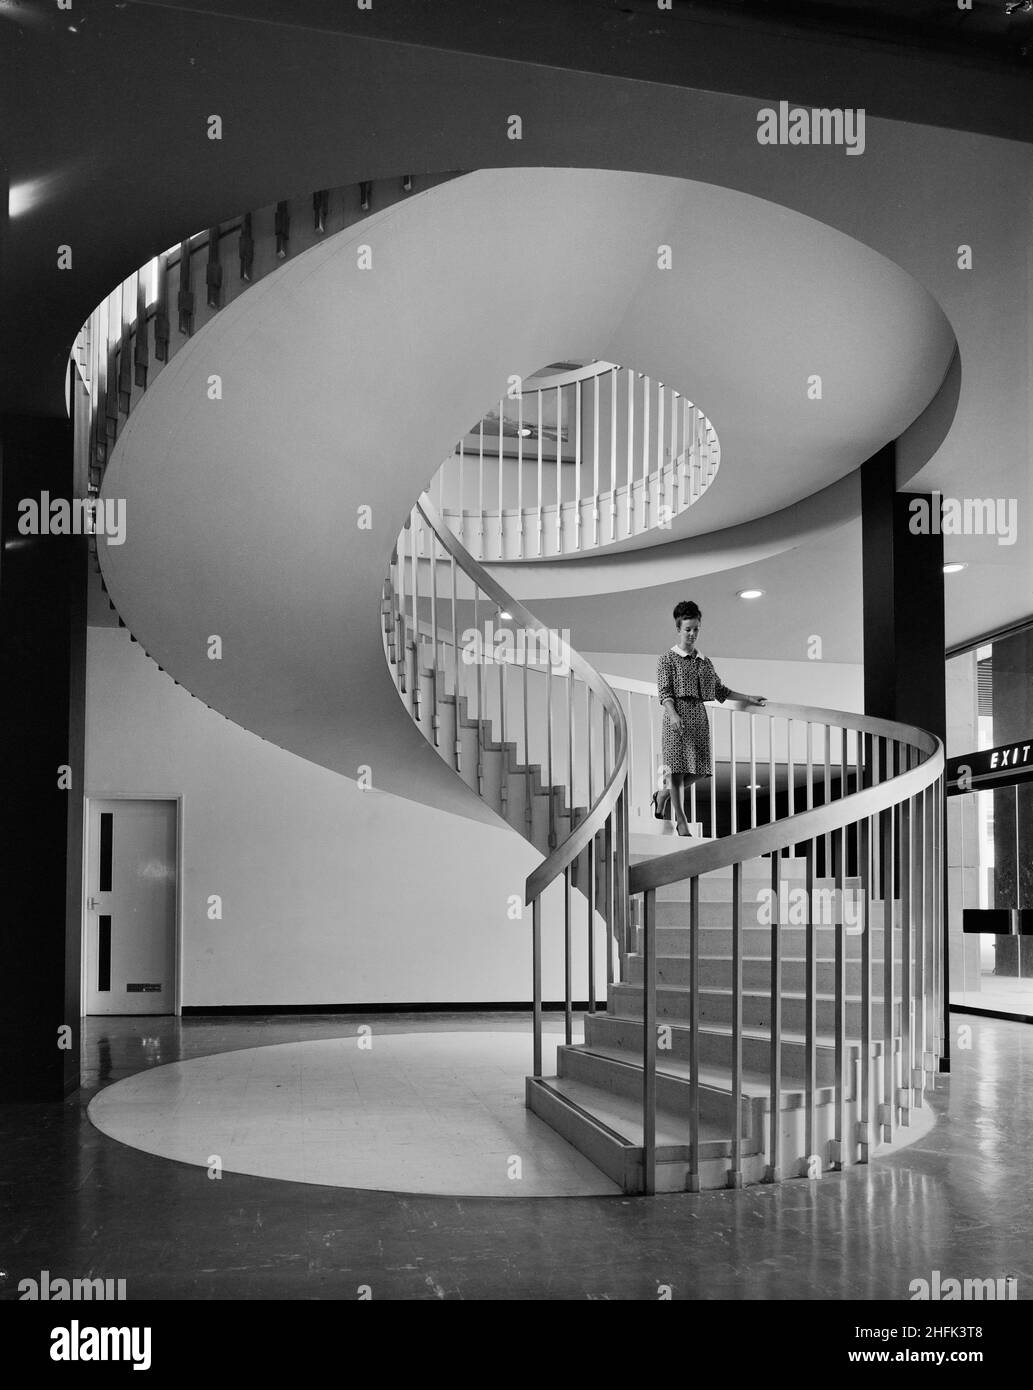 Paternoster Square, City of London, 23/06/1965. A woman walking down a winding staircase in a building at the Paternoster development. Work on the Paternoster development was carried out in a joint venture by John Laing Construction Limited, Trollope and Colls Limited, and George Wimpey and Company Limited. The scheme involved the redevelopment of a seven acre site on the north side of St Paul&#x2019;s Cathedral. The site had been almost entirely devastated during an incendiary raid in December 1940. The development consisted of a series of office blocks, a shopping precinct, an extensive piaz Stock Photo